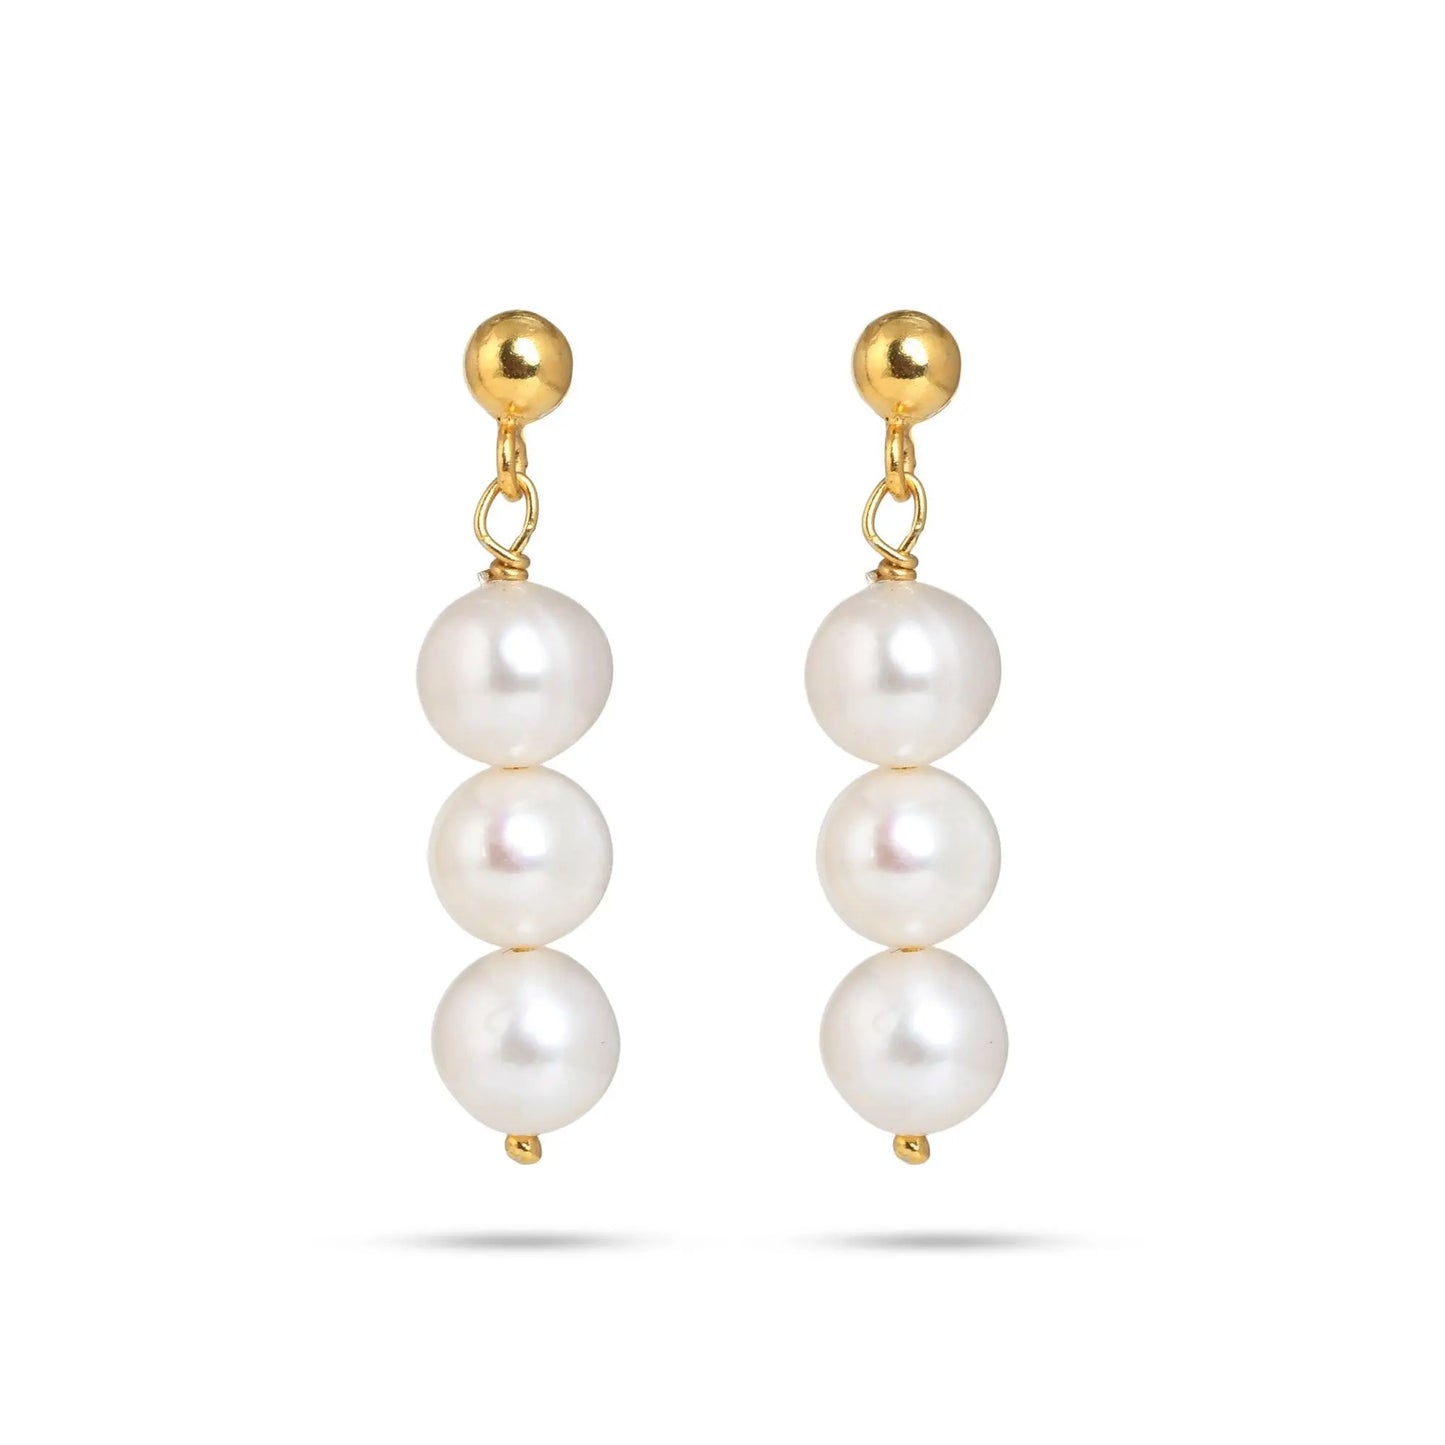 Classic Pearl Drop Silver Earrings - From Purl Purl